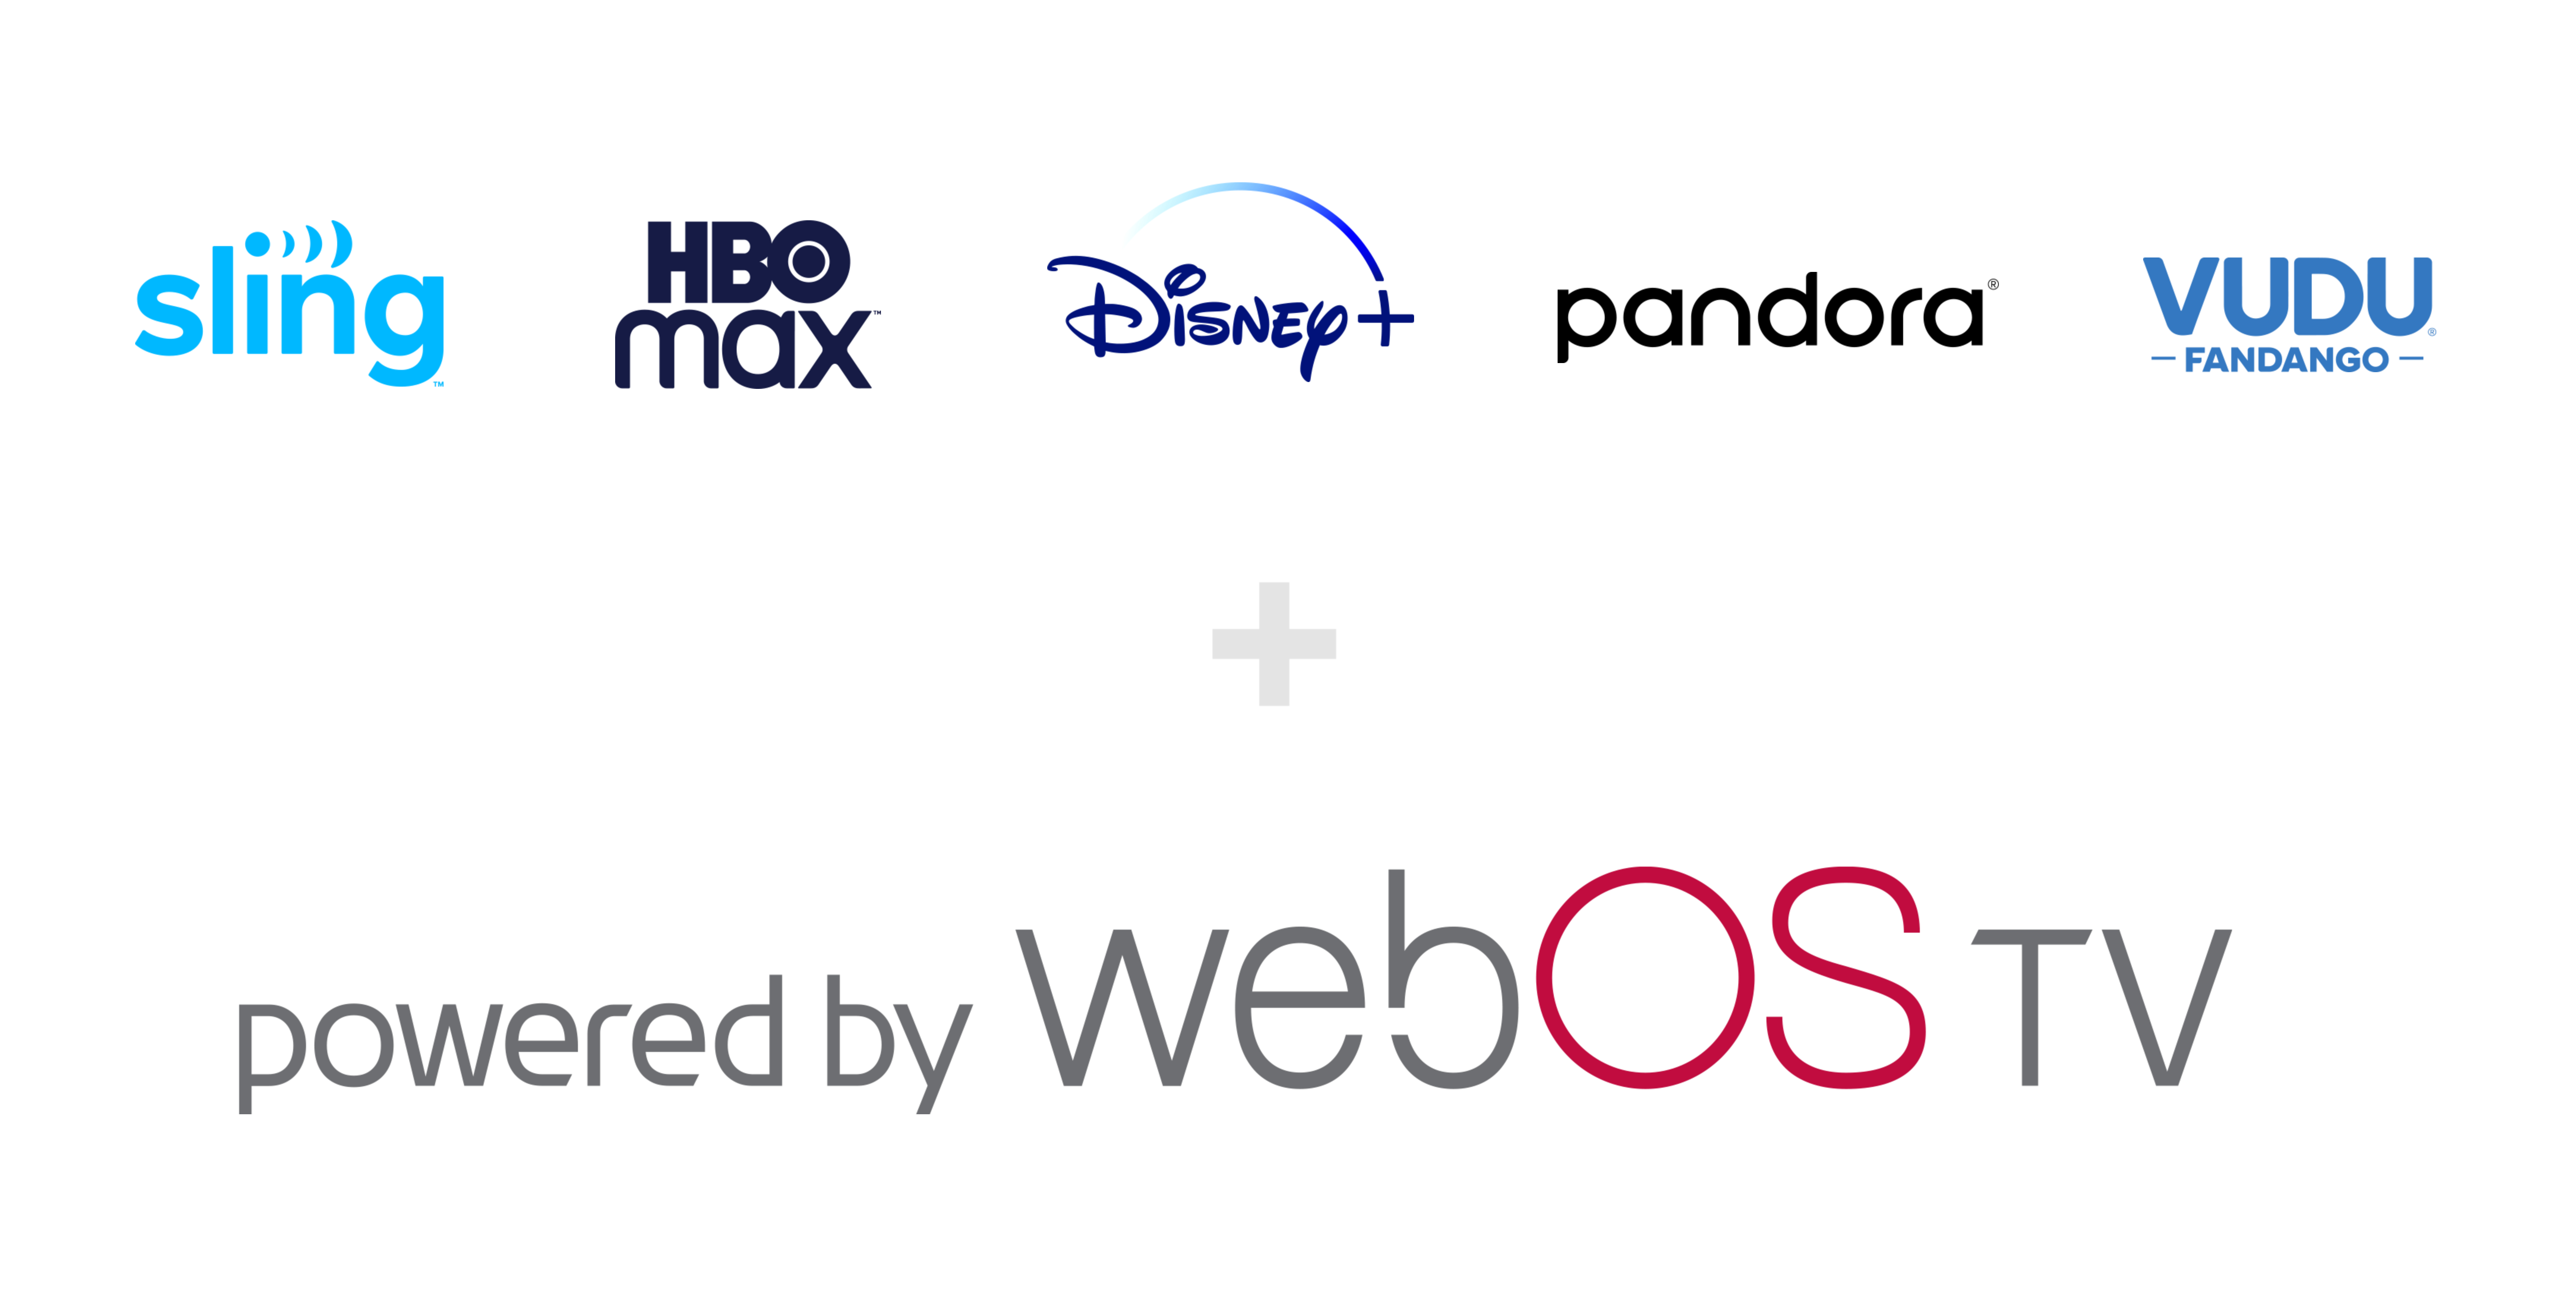 The large 'powered by webOS TV' logo with smaller logos of 26 brands joining the webOS TV ecosystem below